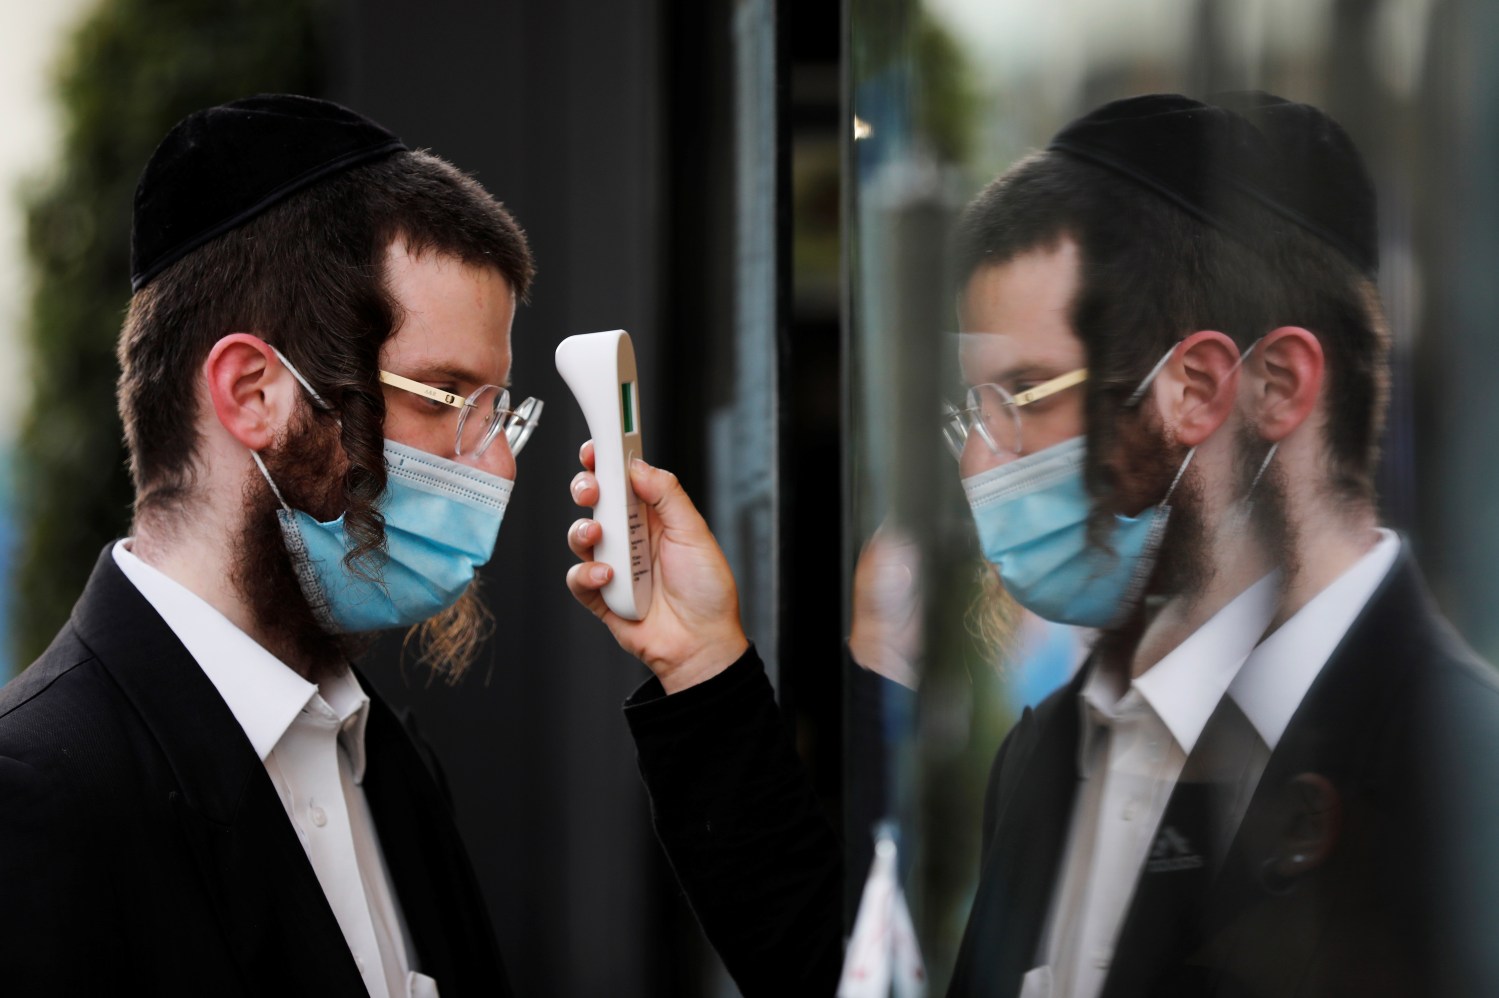 A visitor gets his temperature measured as he wears a face mask at a fashion shopping center in Ashdod, as restrictions over the coronavirus disease (COVID-19) ease around Israel, May 5, 2020. REUTERS/Amir Cohen